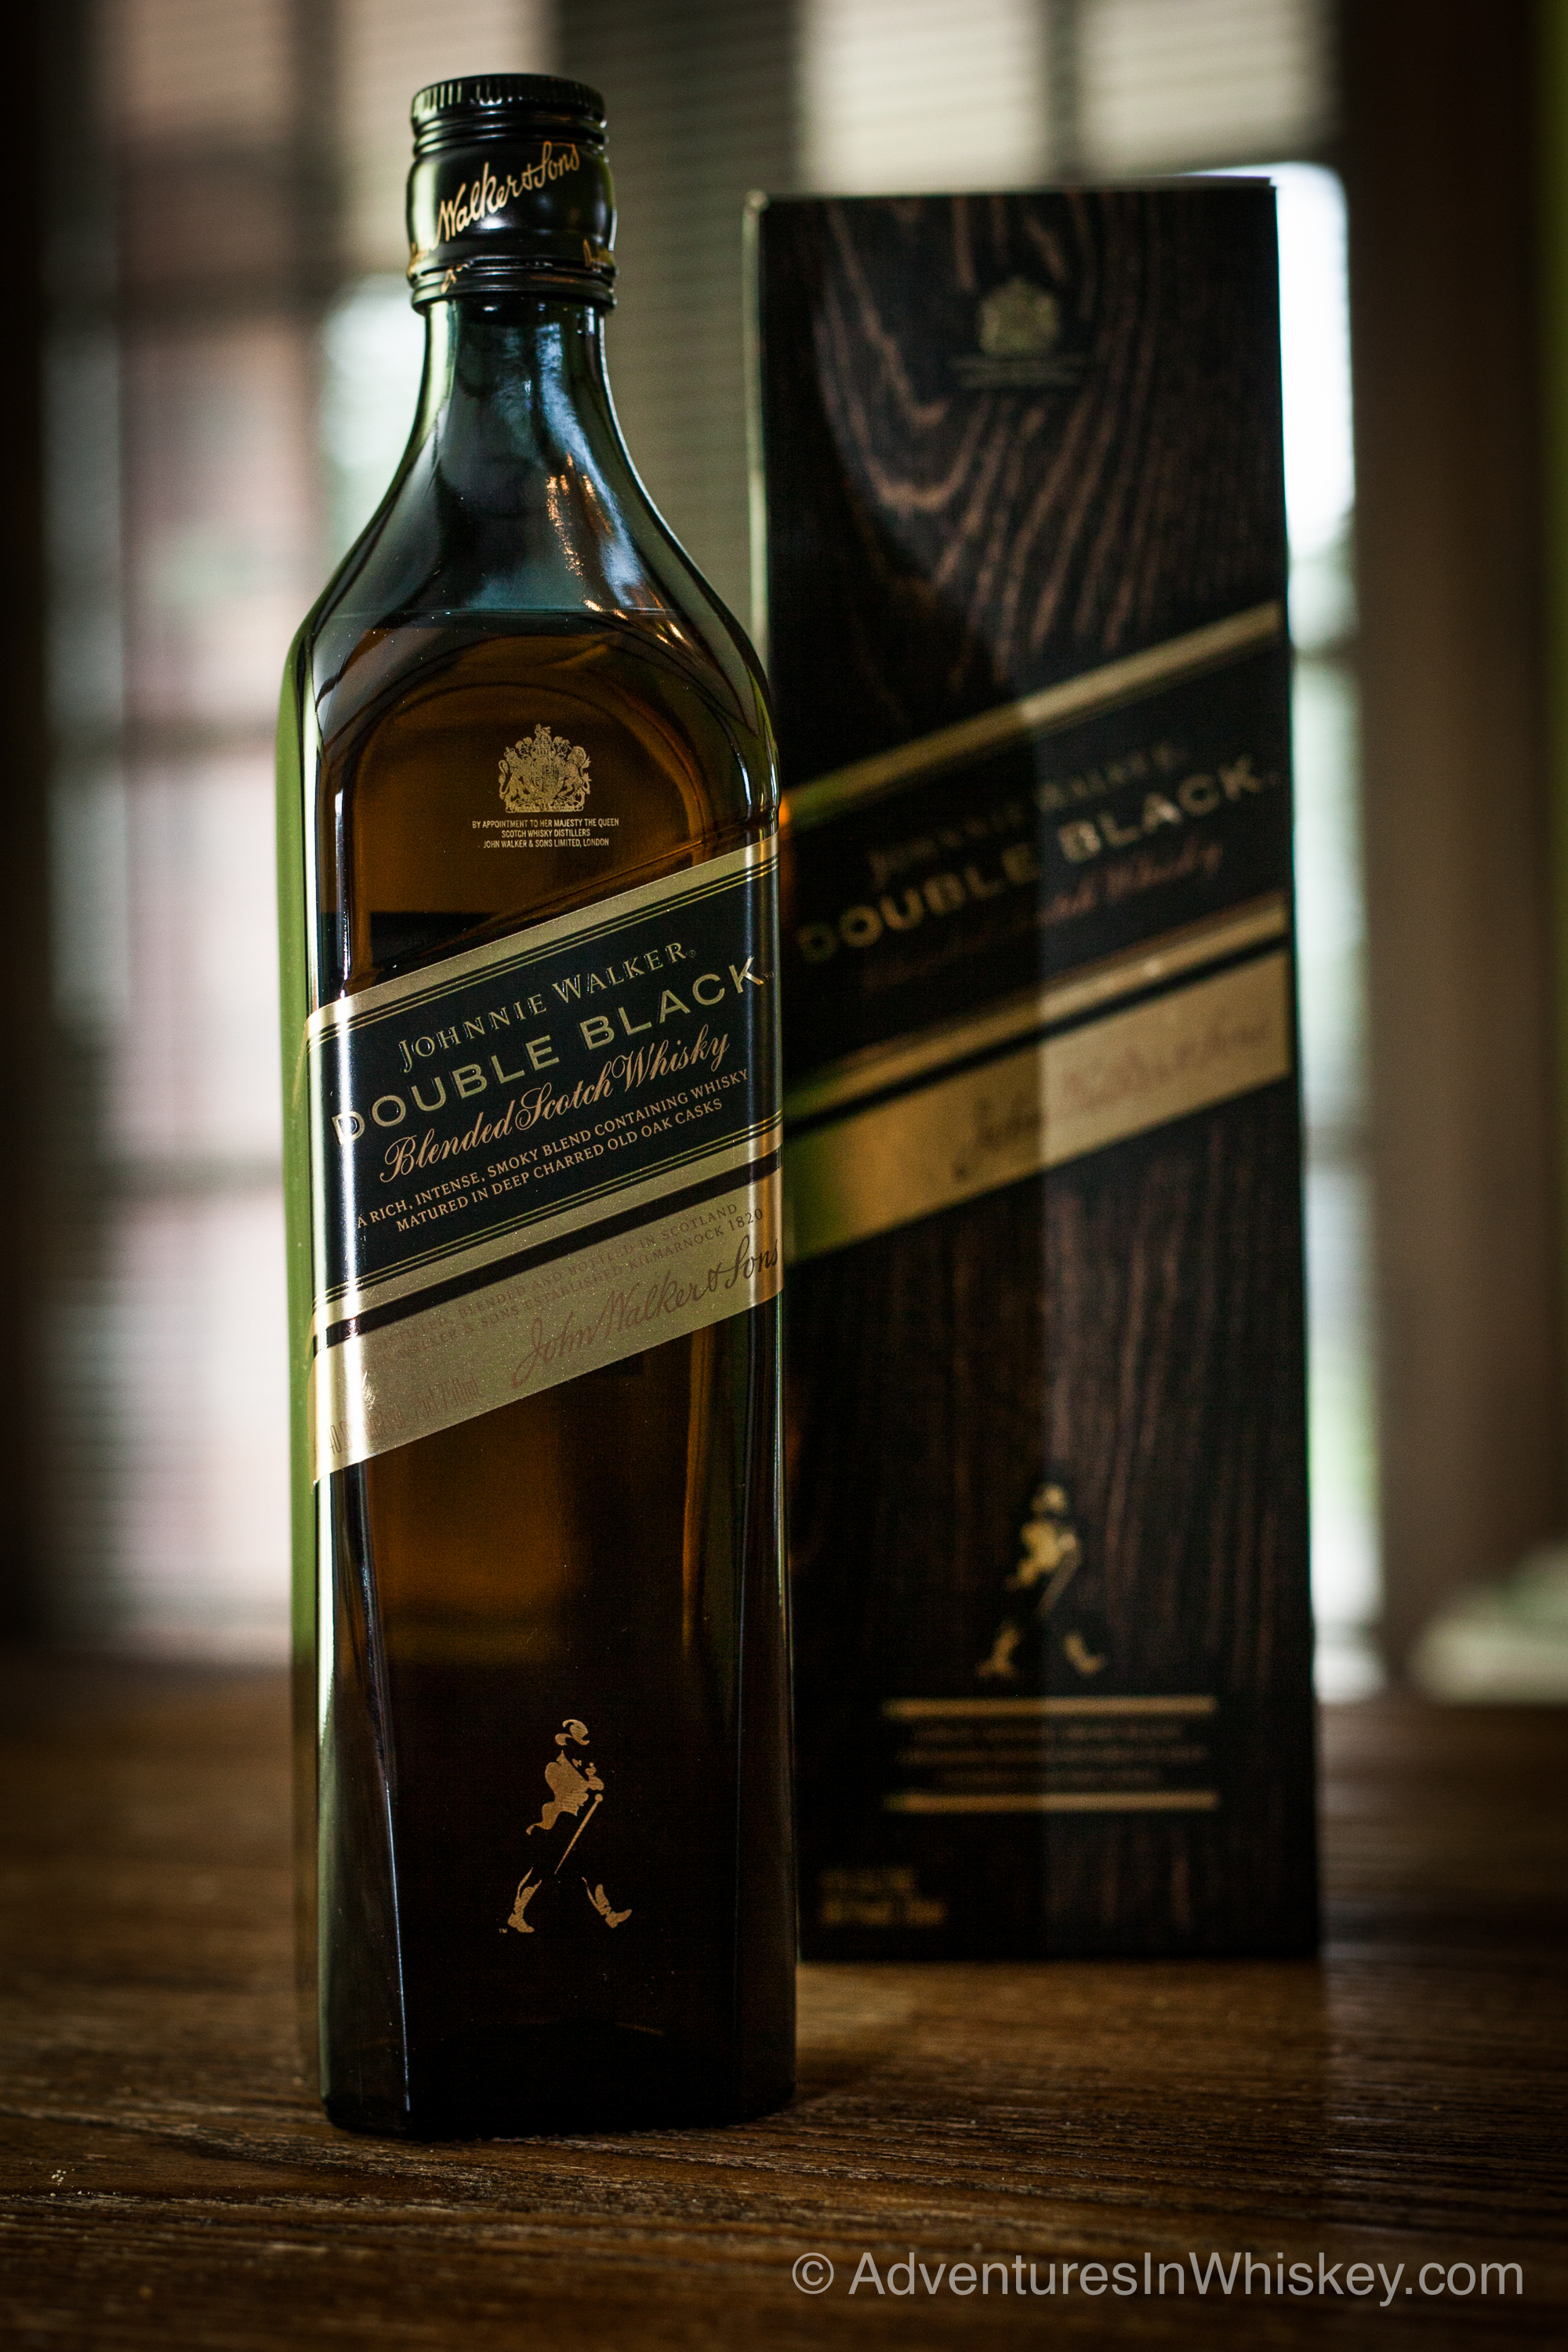 Ster Absurd Besparing Johnnie Walker Double Black Scotch Whisky Review | Adventures In Whiskey